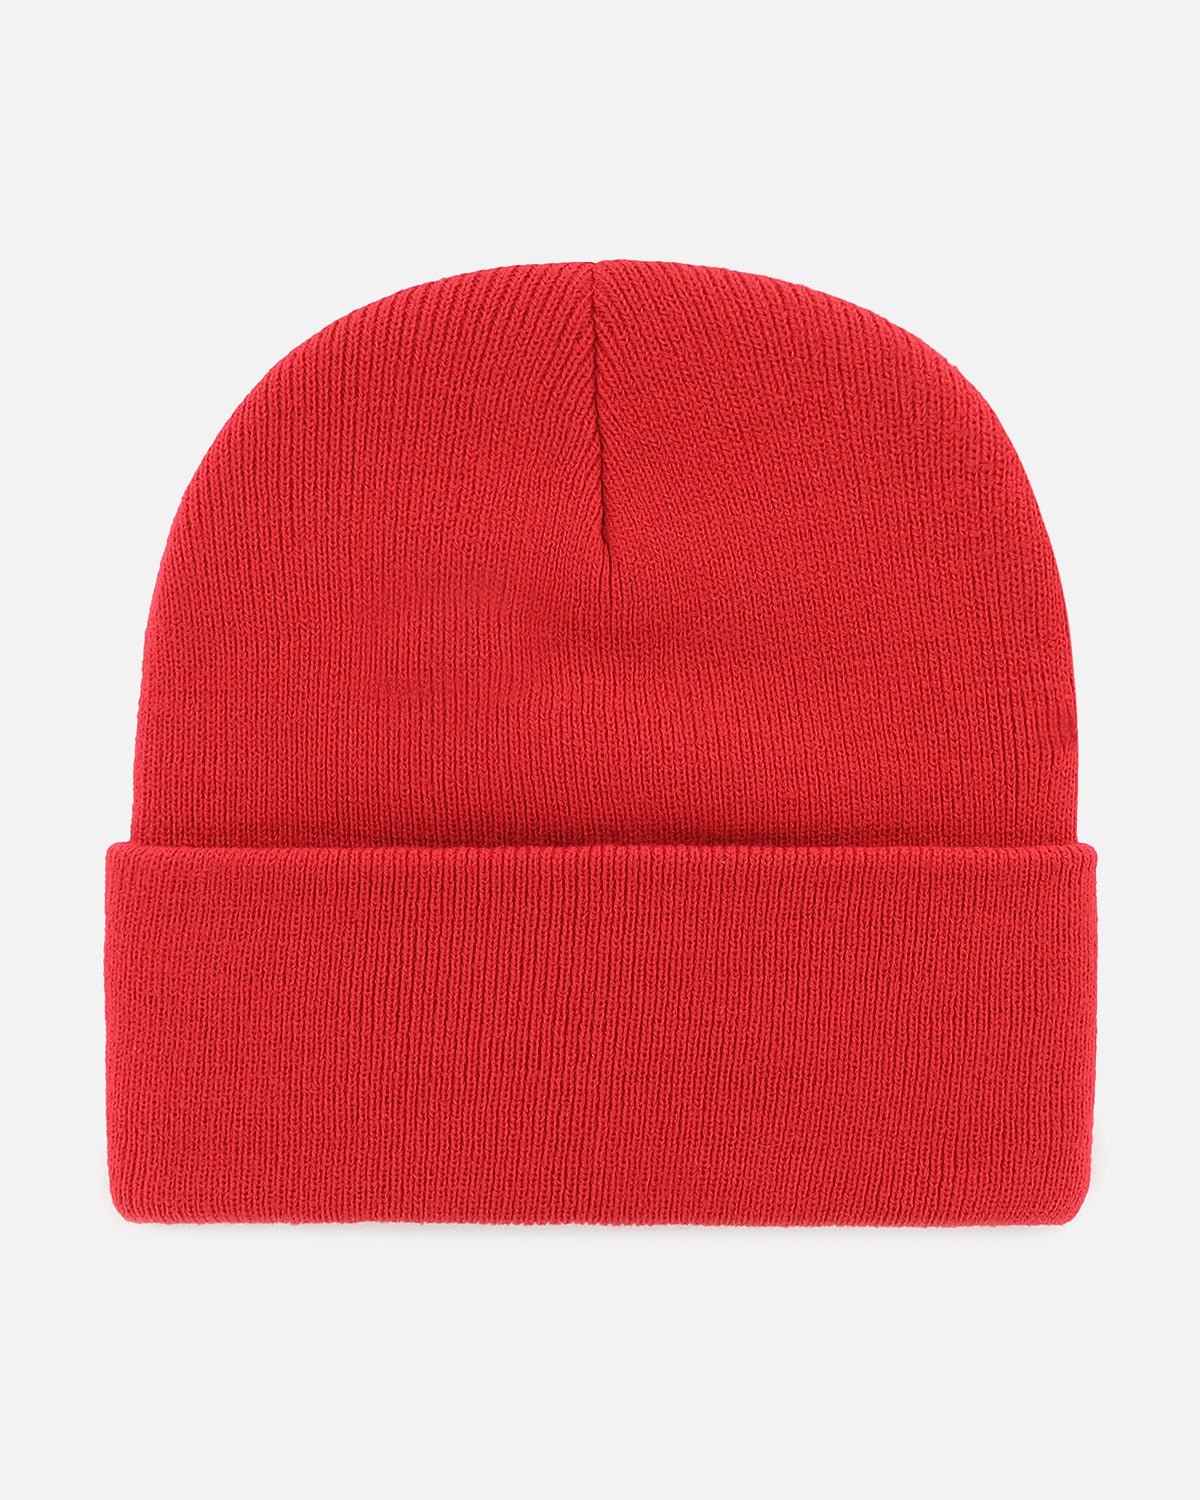 NFFC Red Haymaker '47 Cuff Knit - Nottingham Forest FC